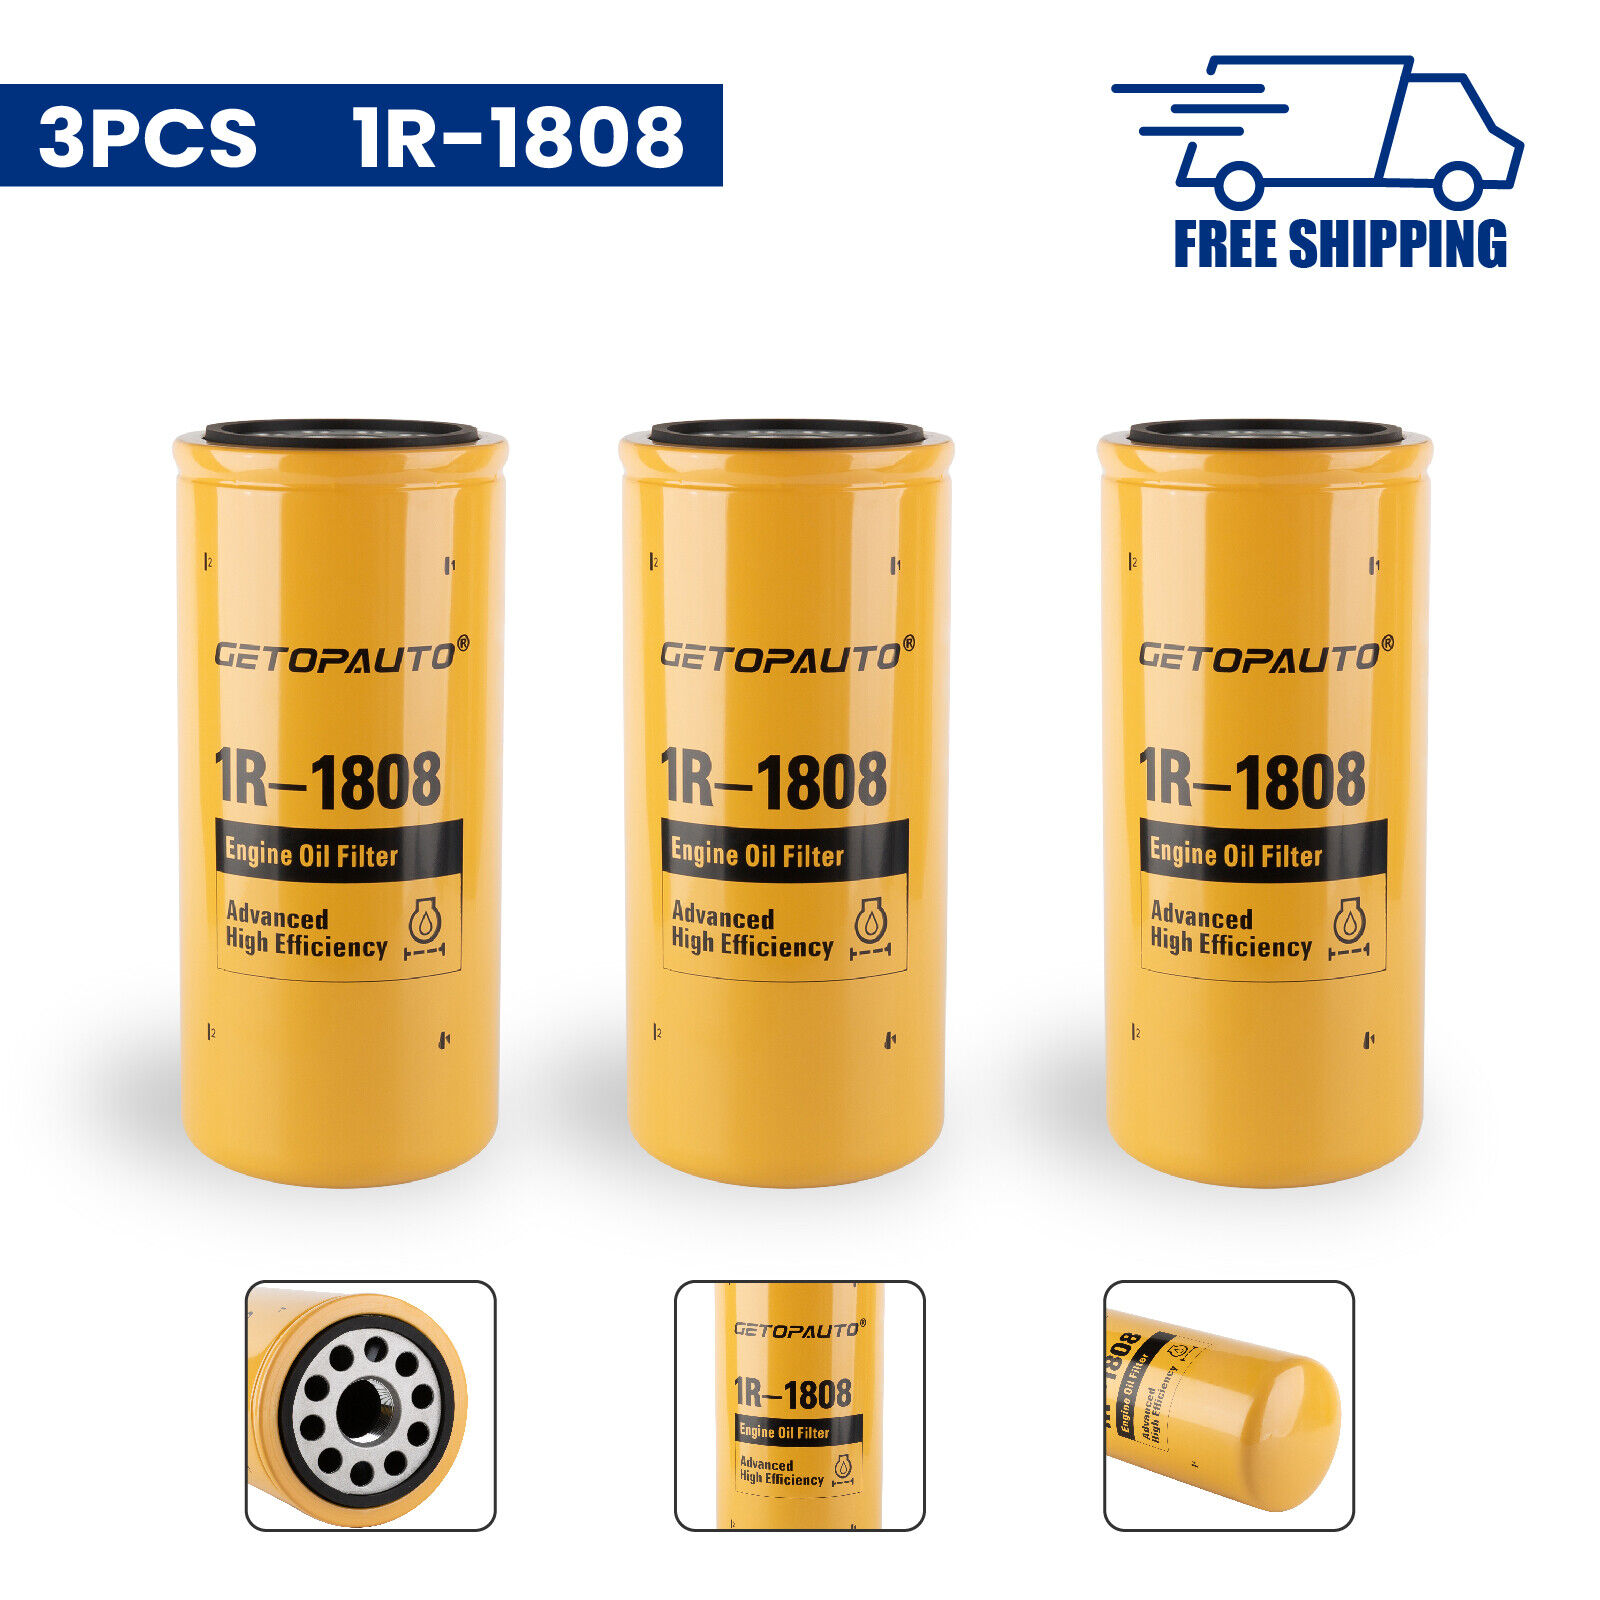 3 PCS Engine Oil Filter For Caterpillar Replace 1R-1808 275-2604 P551808